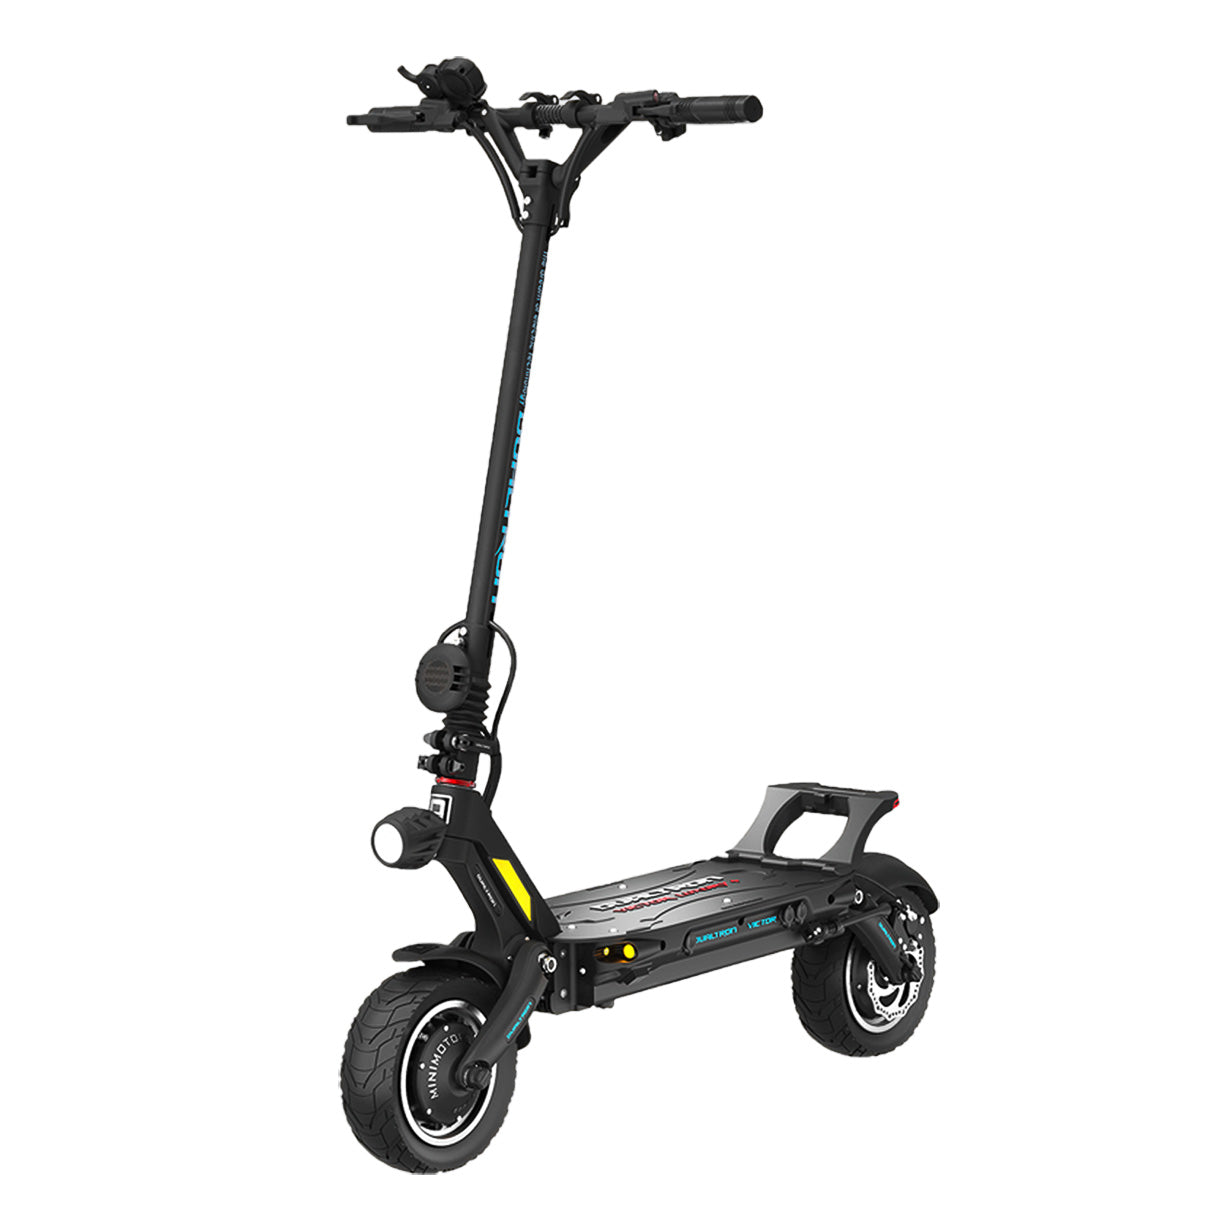 Dualtron Victor Luxury Plus 35 Ah-Electric Scooters London